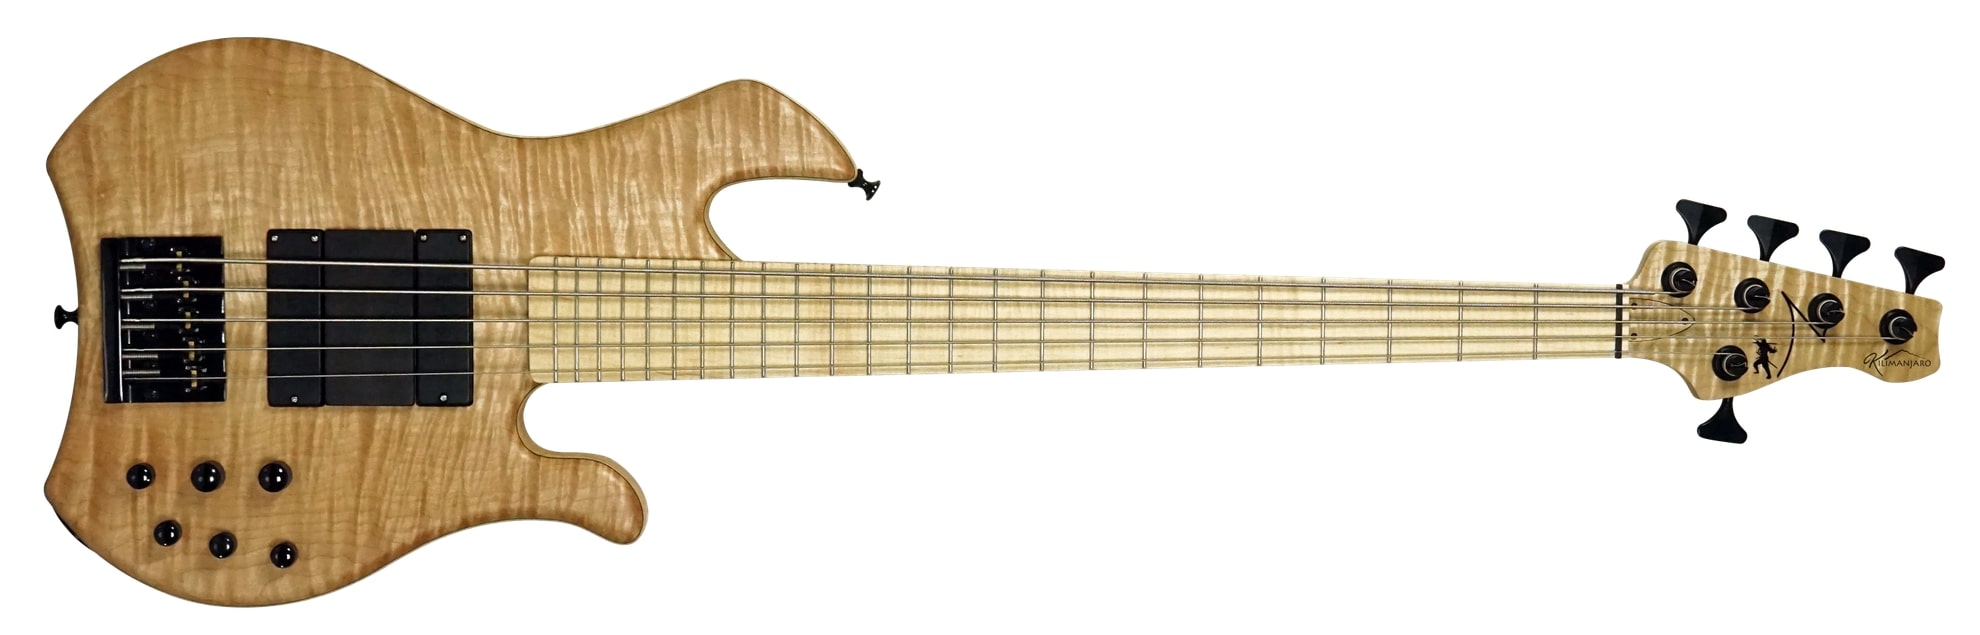 Mark Bass Kilimanjaro 5-string Electric Bass Flamed Maple Top Natural |  L.A. Music - Canada's Favourite Music Store!